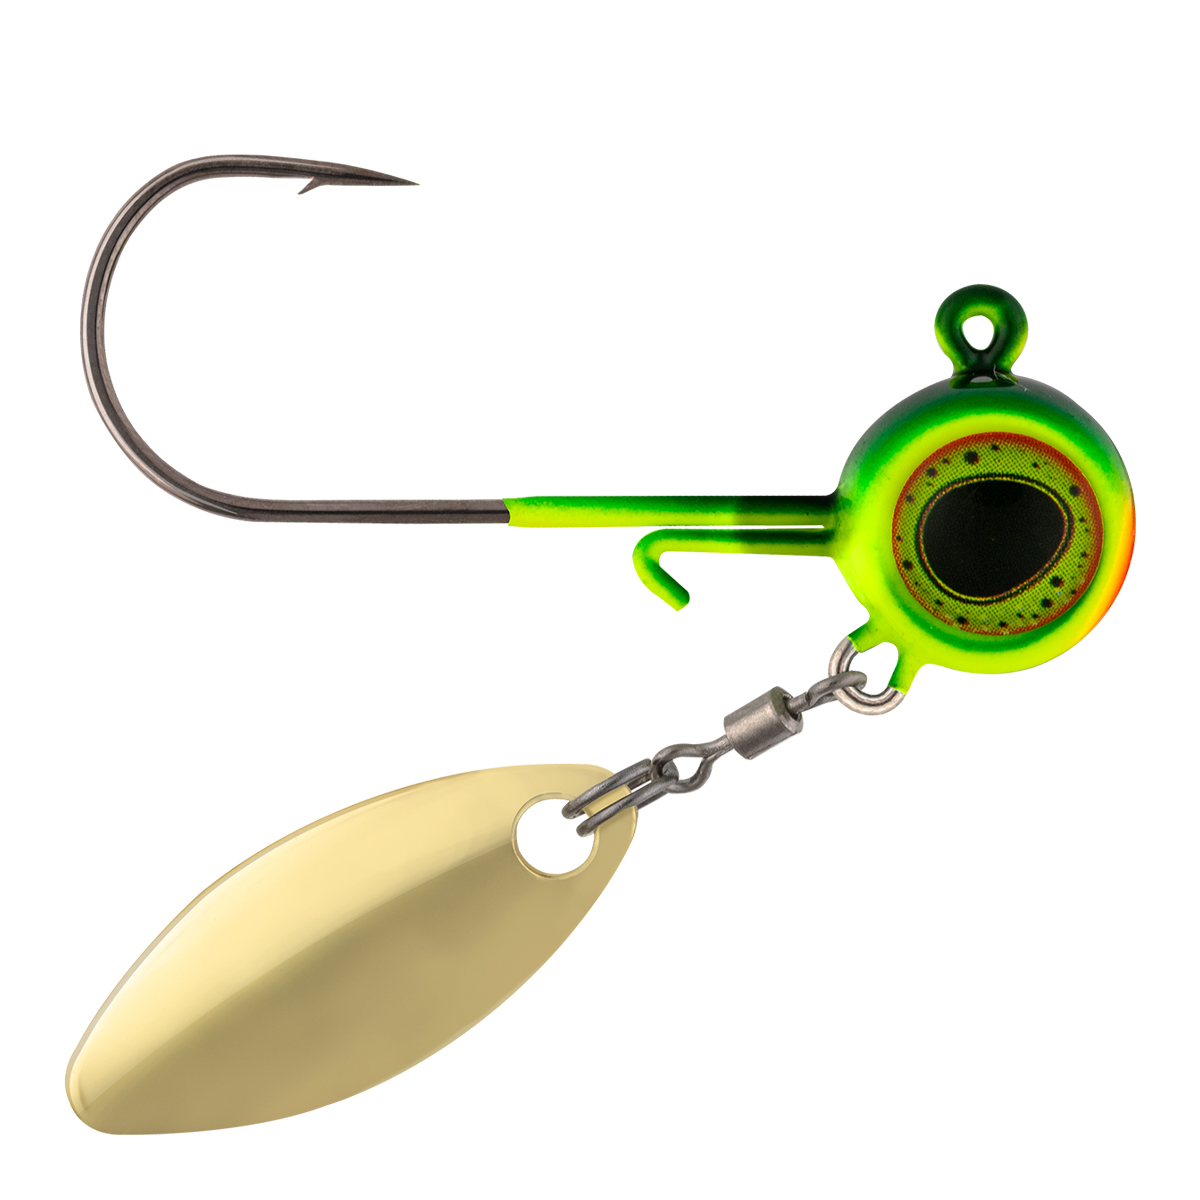 Fishing Lure Components and Terminal Tackle